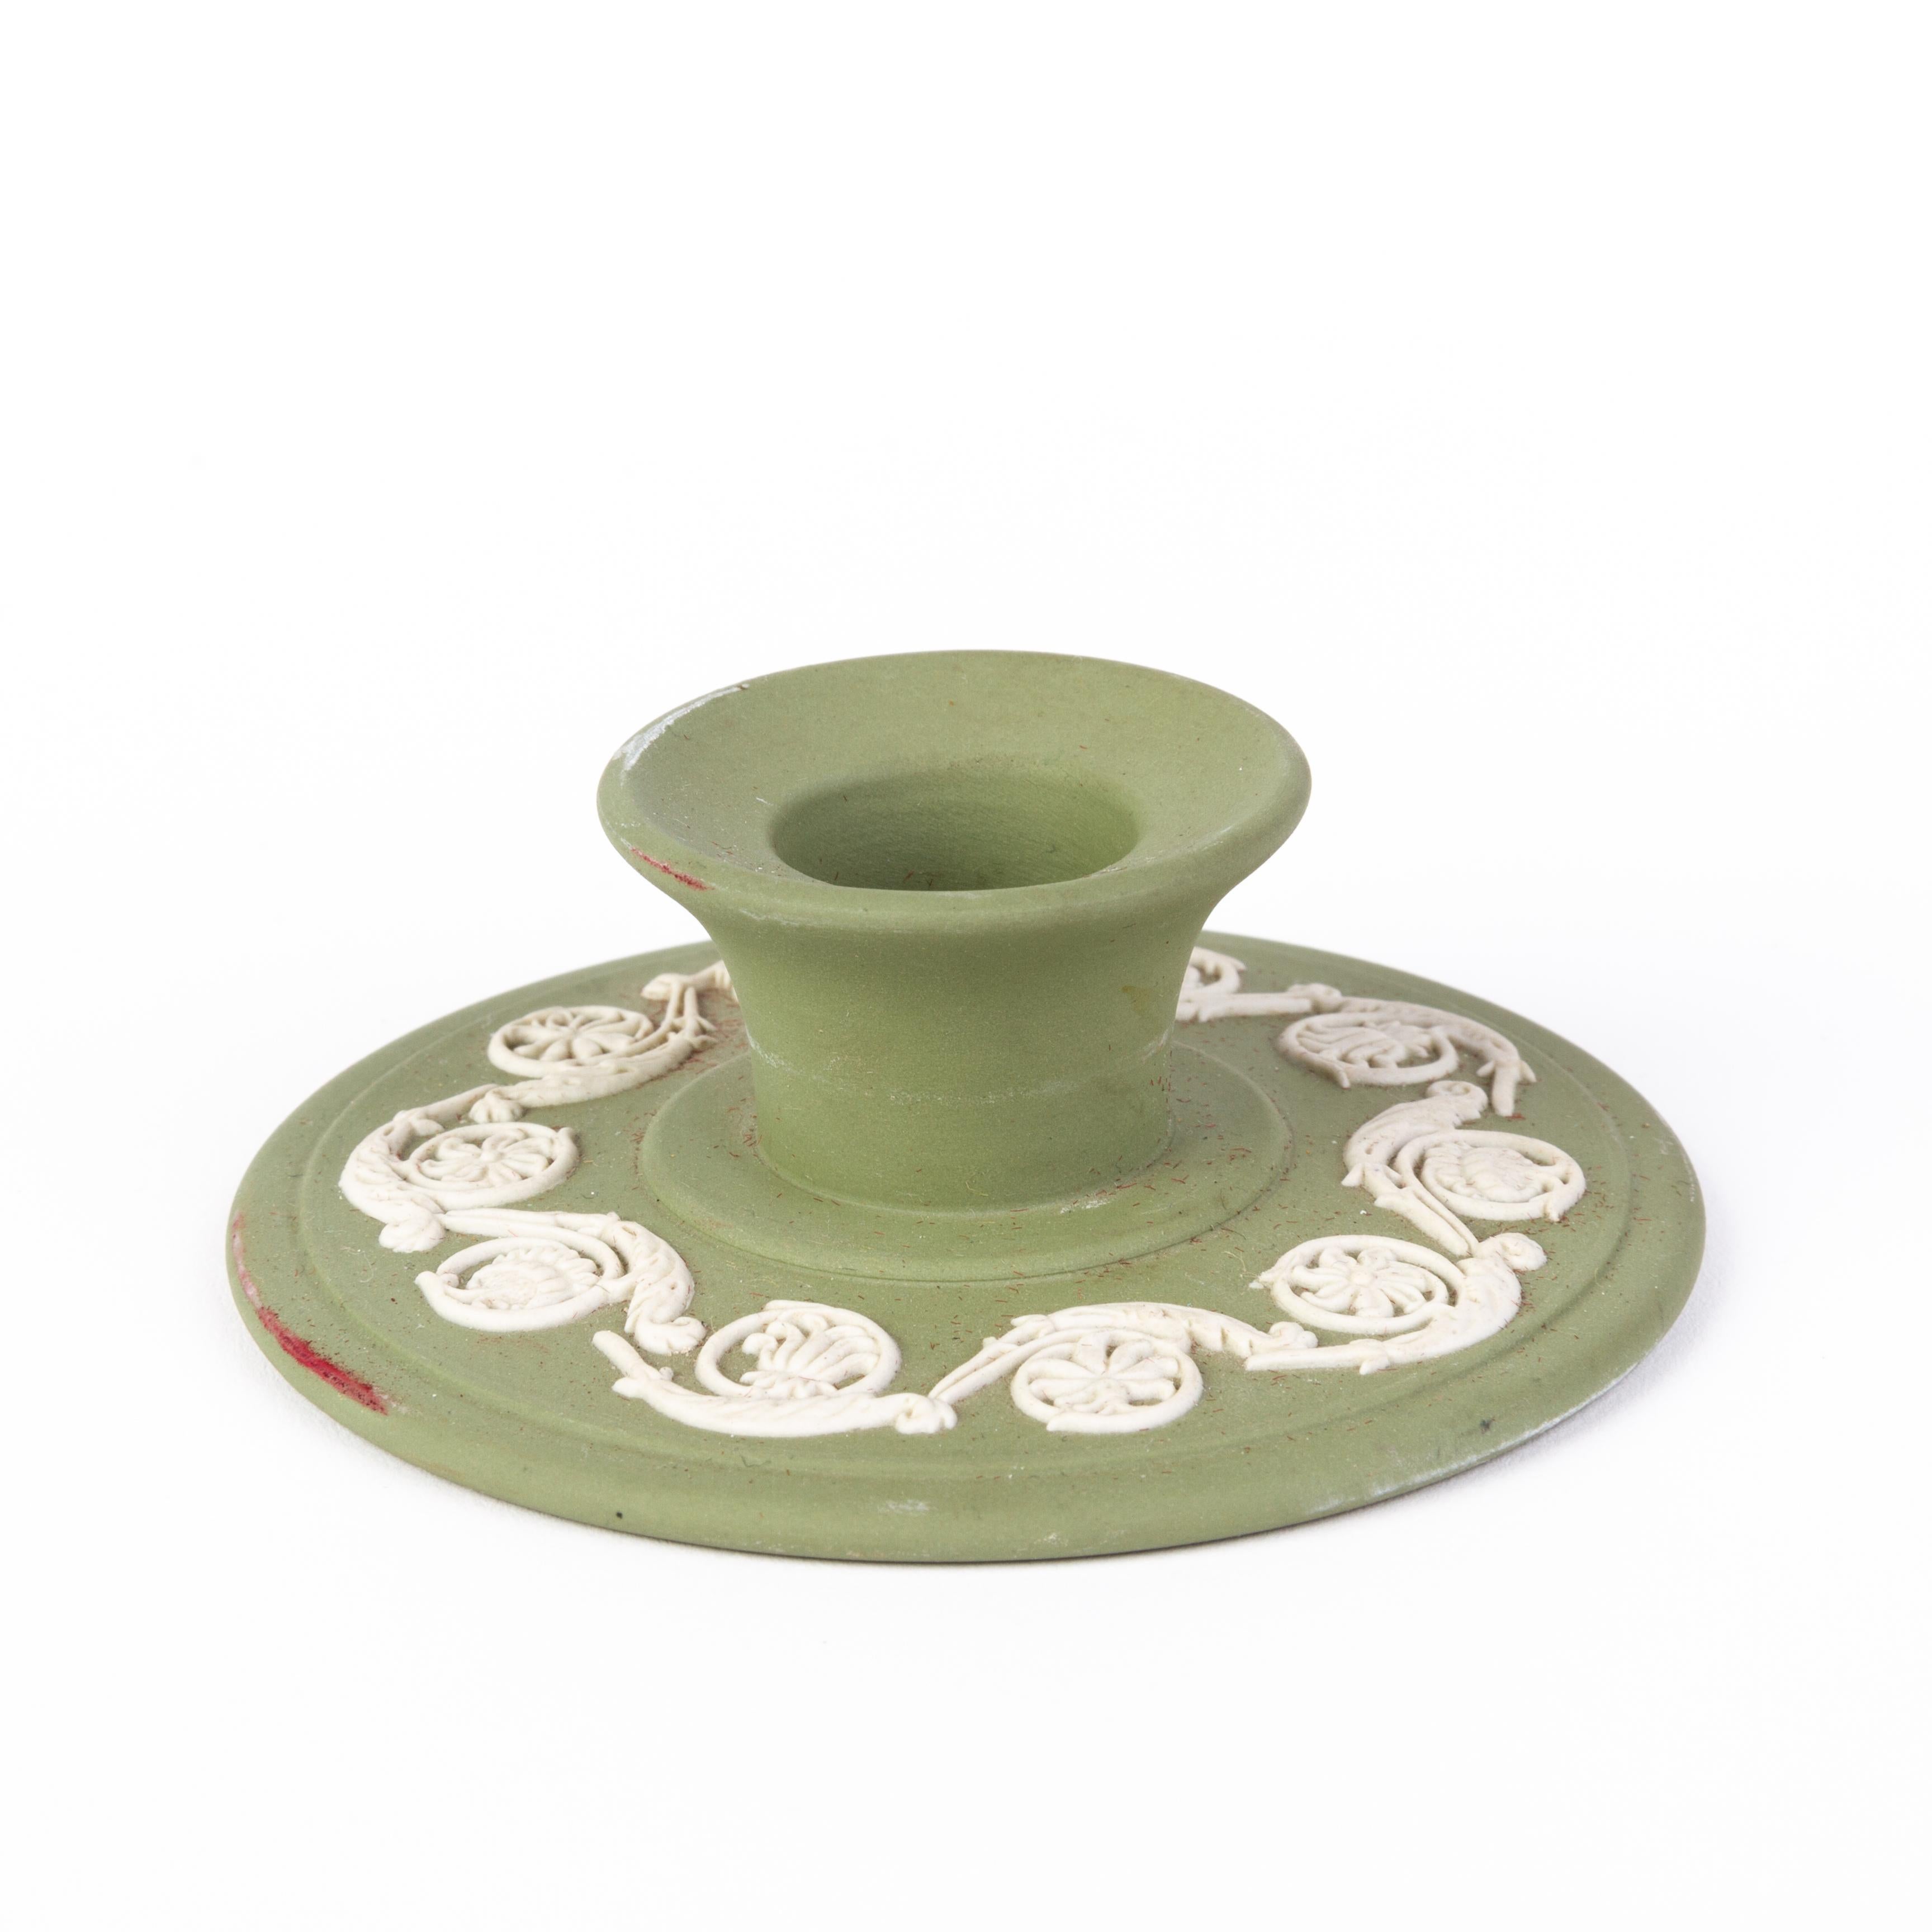 Wedgwood Green Jasperware Neoclassical Cameo Candle Holder 
Good condition
Free international shipping.